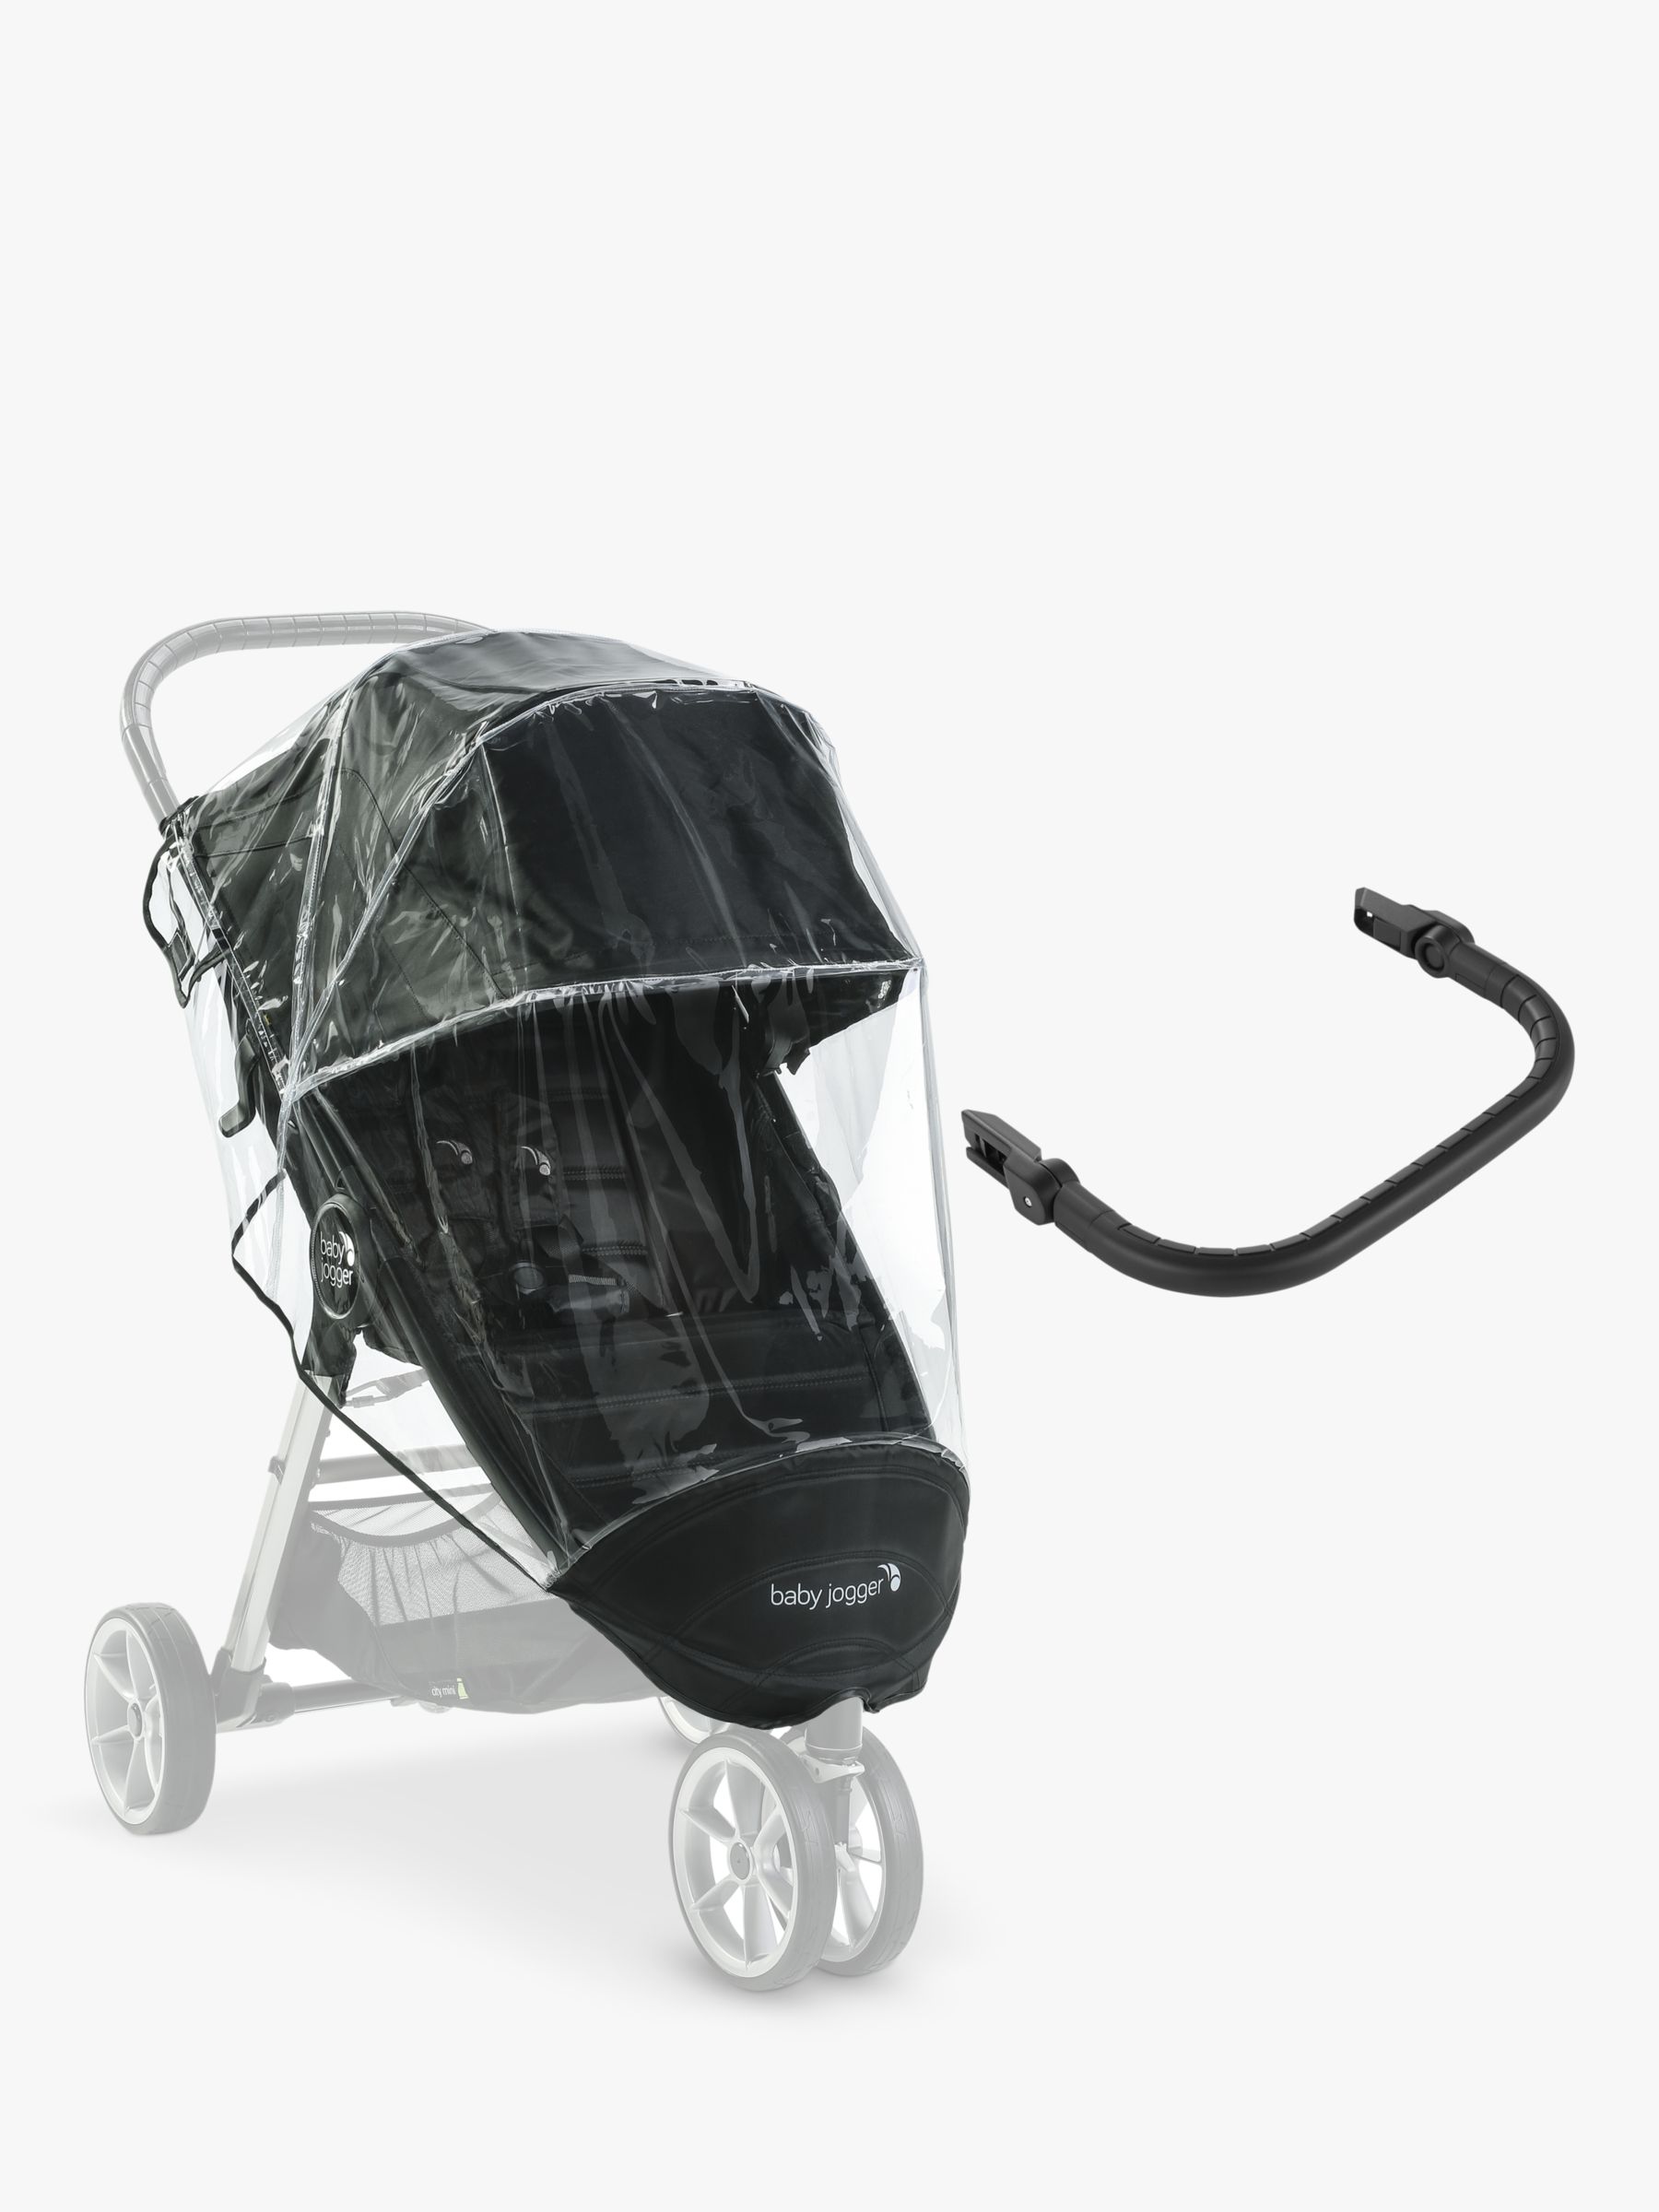 Baby Jogger CM2 Rain Cover and Belly Bar Pushchair Set